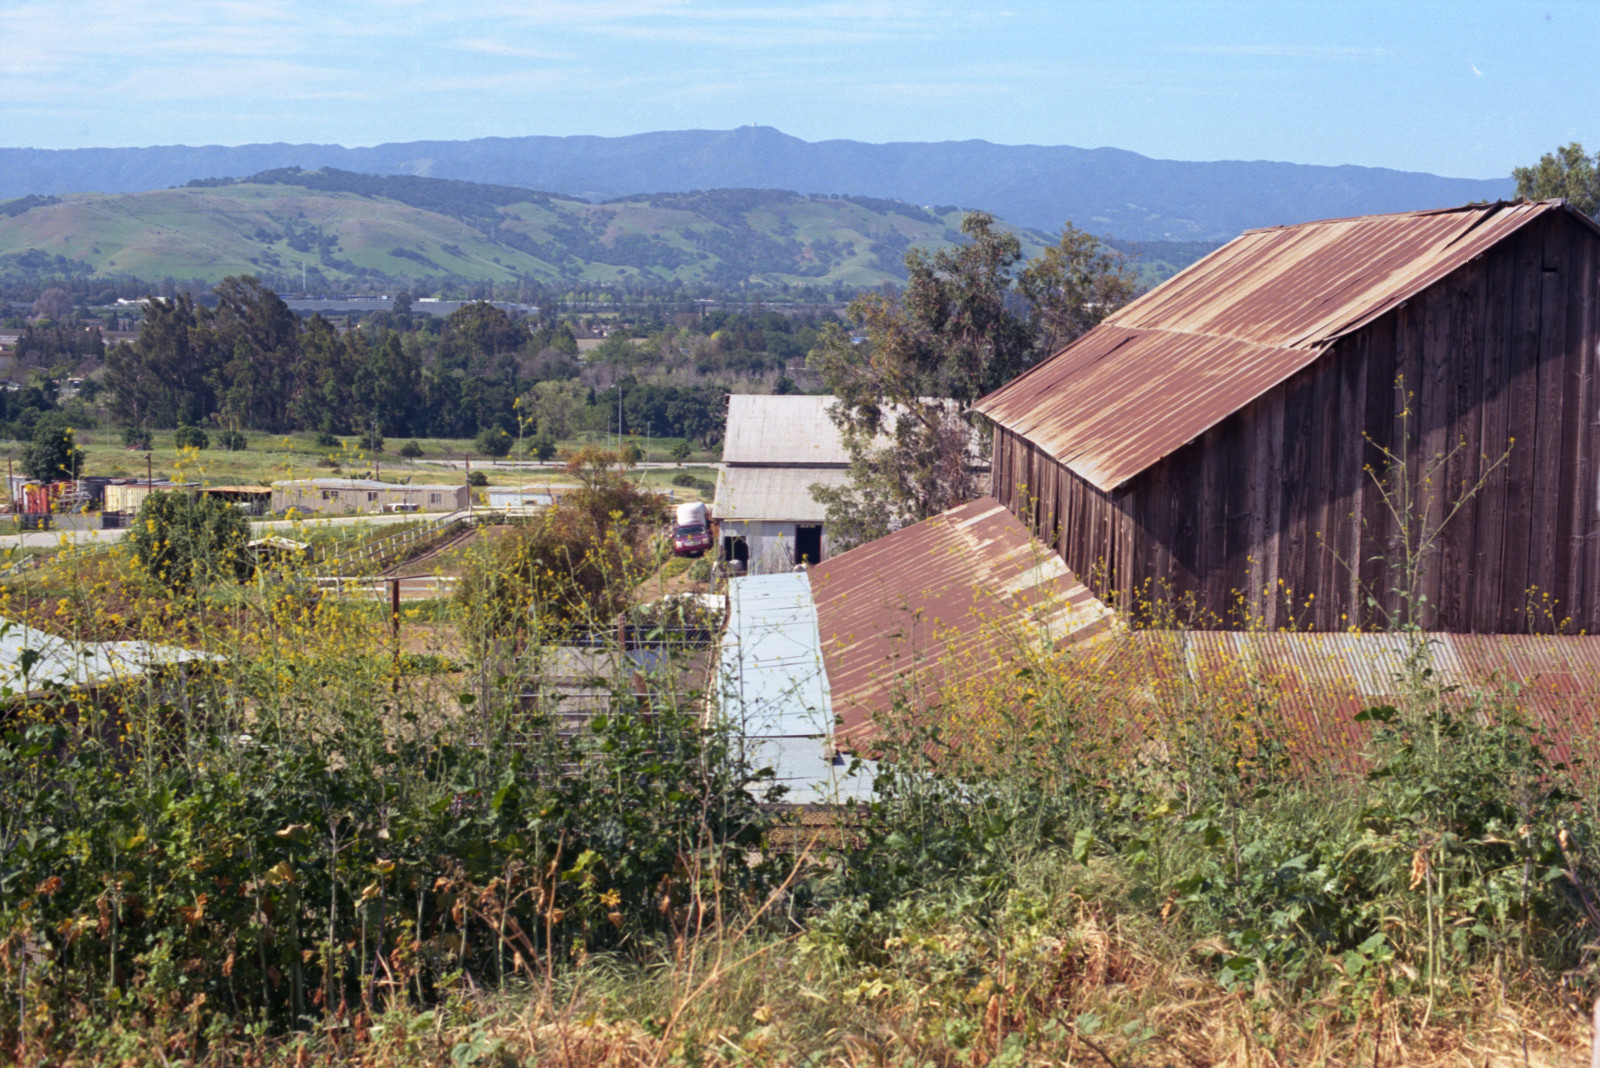 Basilica barn with rusted corrugated iron roof, garden and grasses foreground. In the distance, the valley, then a range of hills, and far distant the coast range, all in winter green. Santa Clara County.